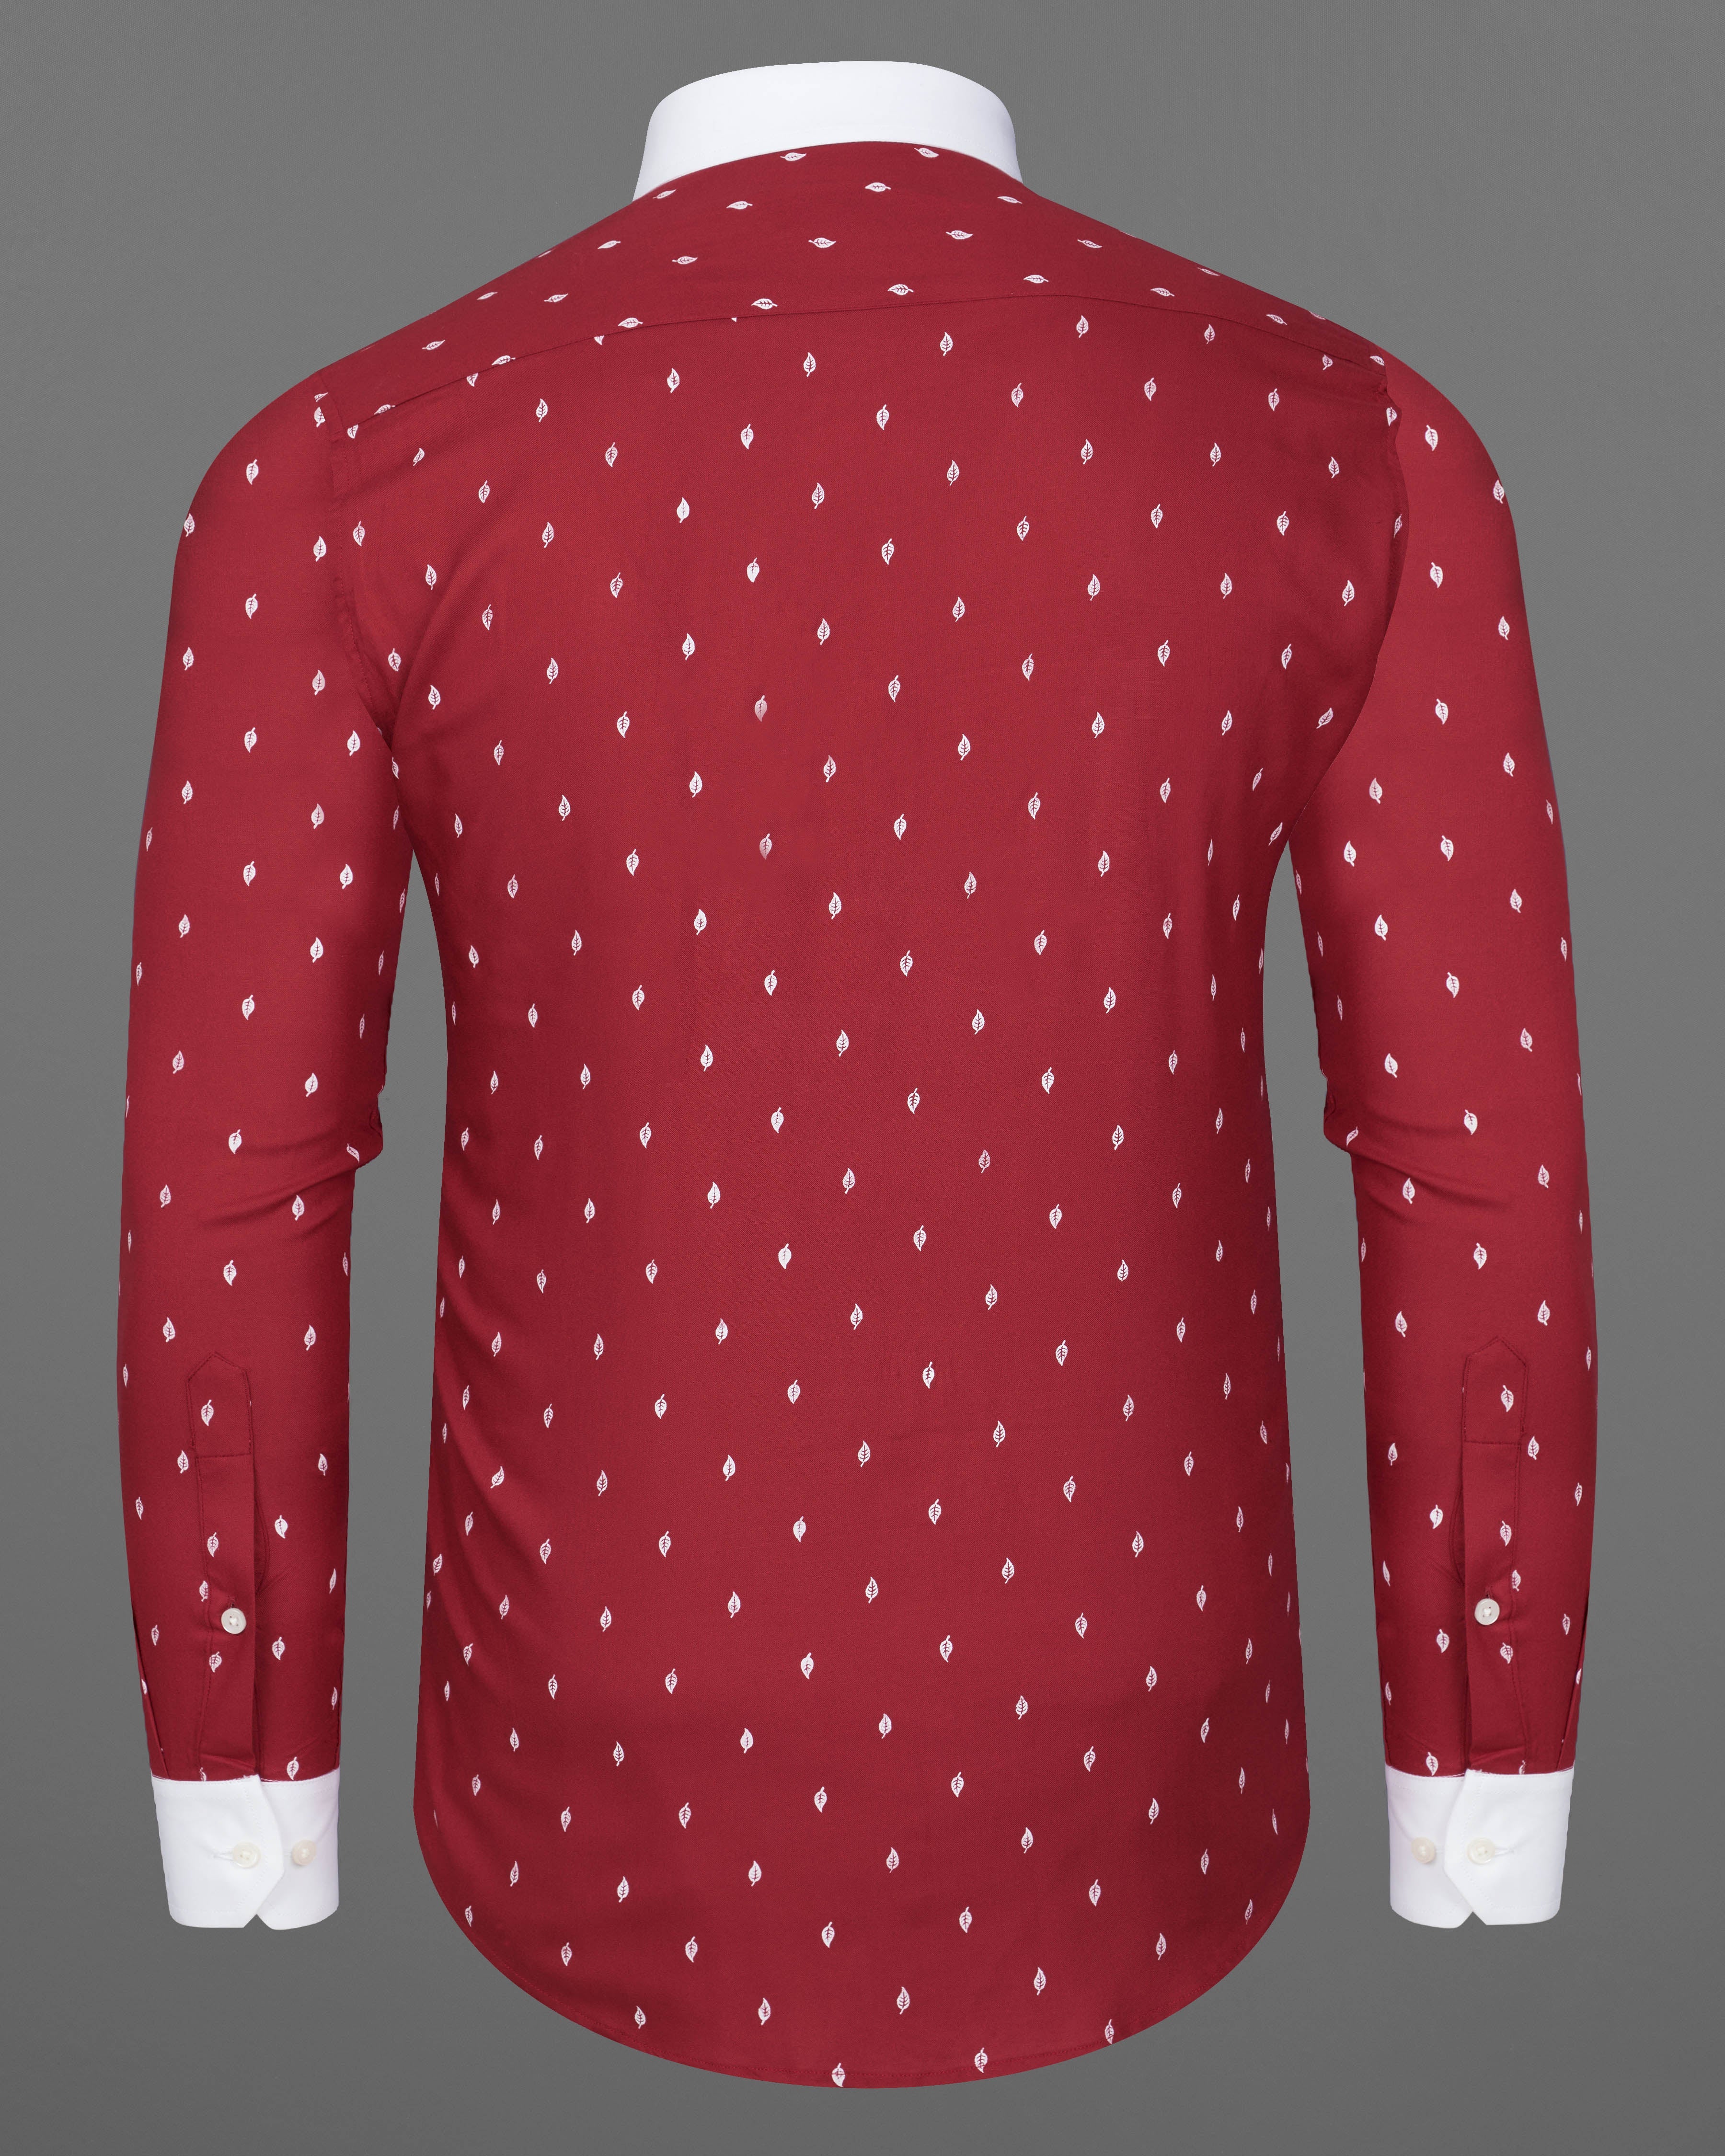 Merlot Red and White Leaves Textured Tencel Shirt 9307-WCC-38,9307-WCC-H-38,9307-WCC-39,9307-WCC-H-39,9307-WCC-40,9307-WCC-H-40,9307-WCC-42,9307-WCC-H-42,9307-WCC-44,9307-WCC-H-44,9307-WCC-46,9307-WCC-H-46,9307-WCC-48,9307-WCC-H-48,9307-WCC-50,9307-WCC-H-50,9307-WCC-52,9307-WCC-H-52